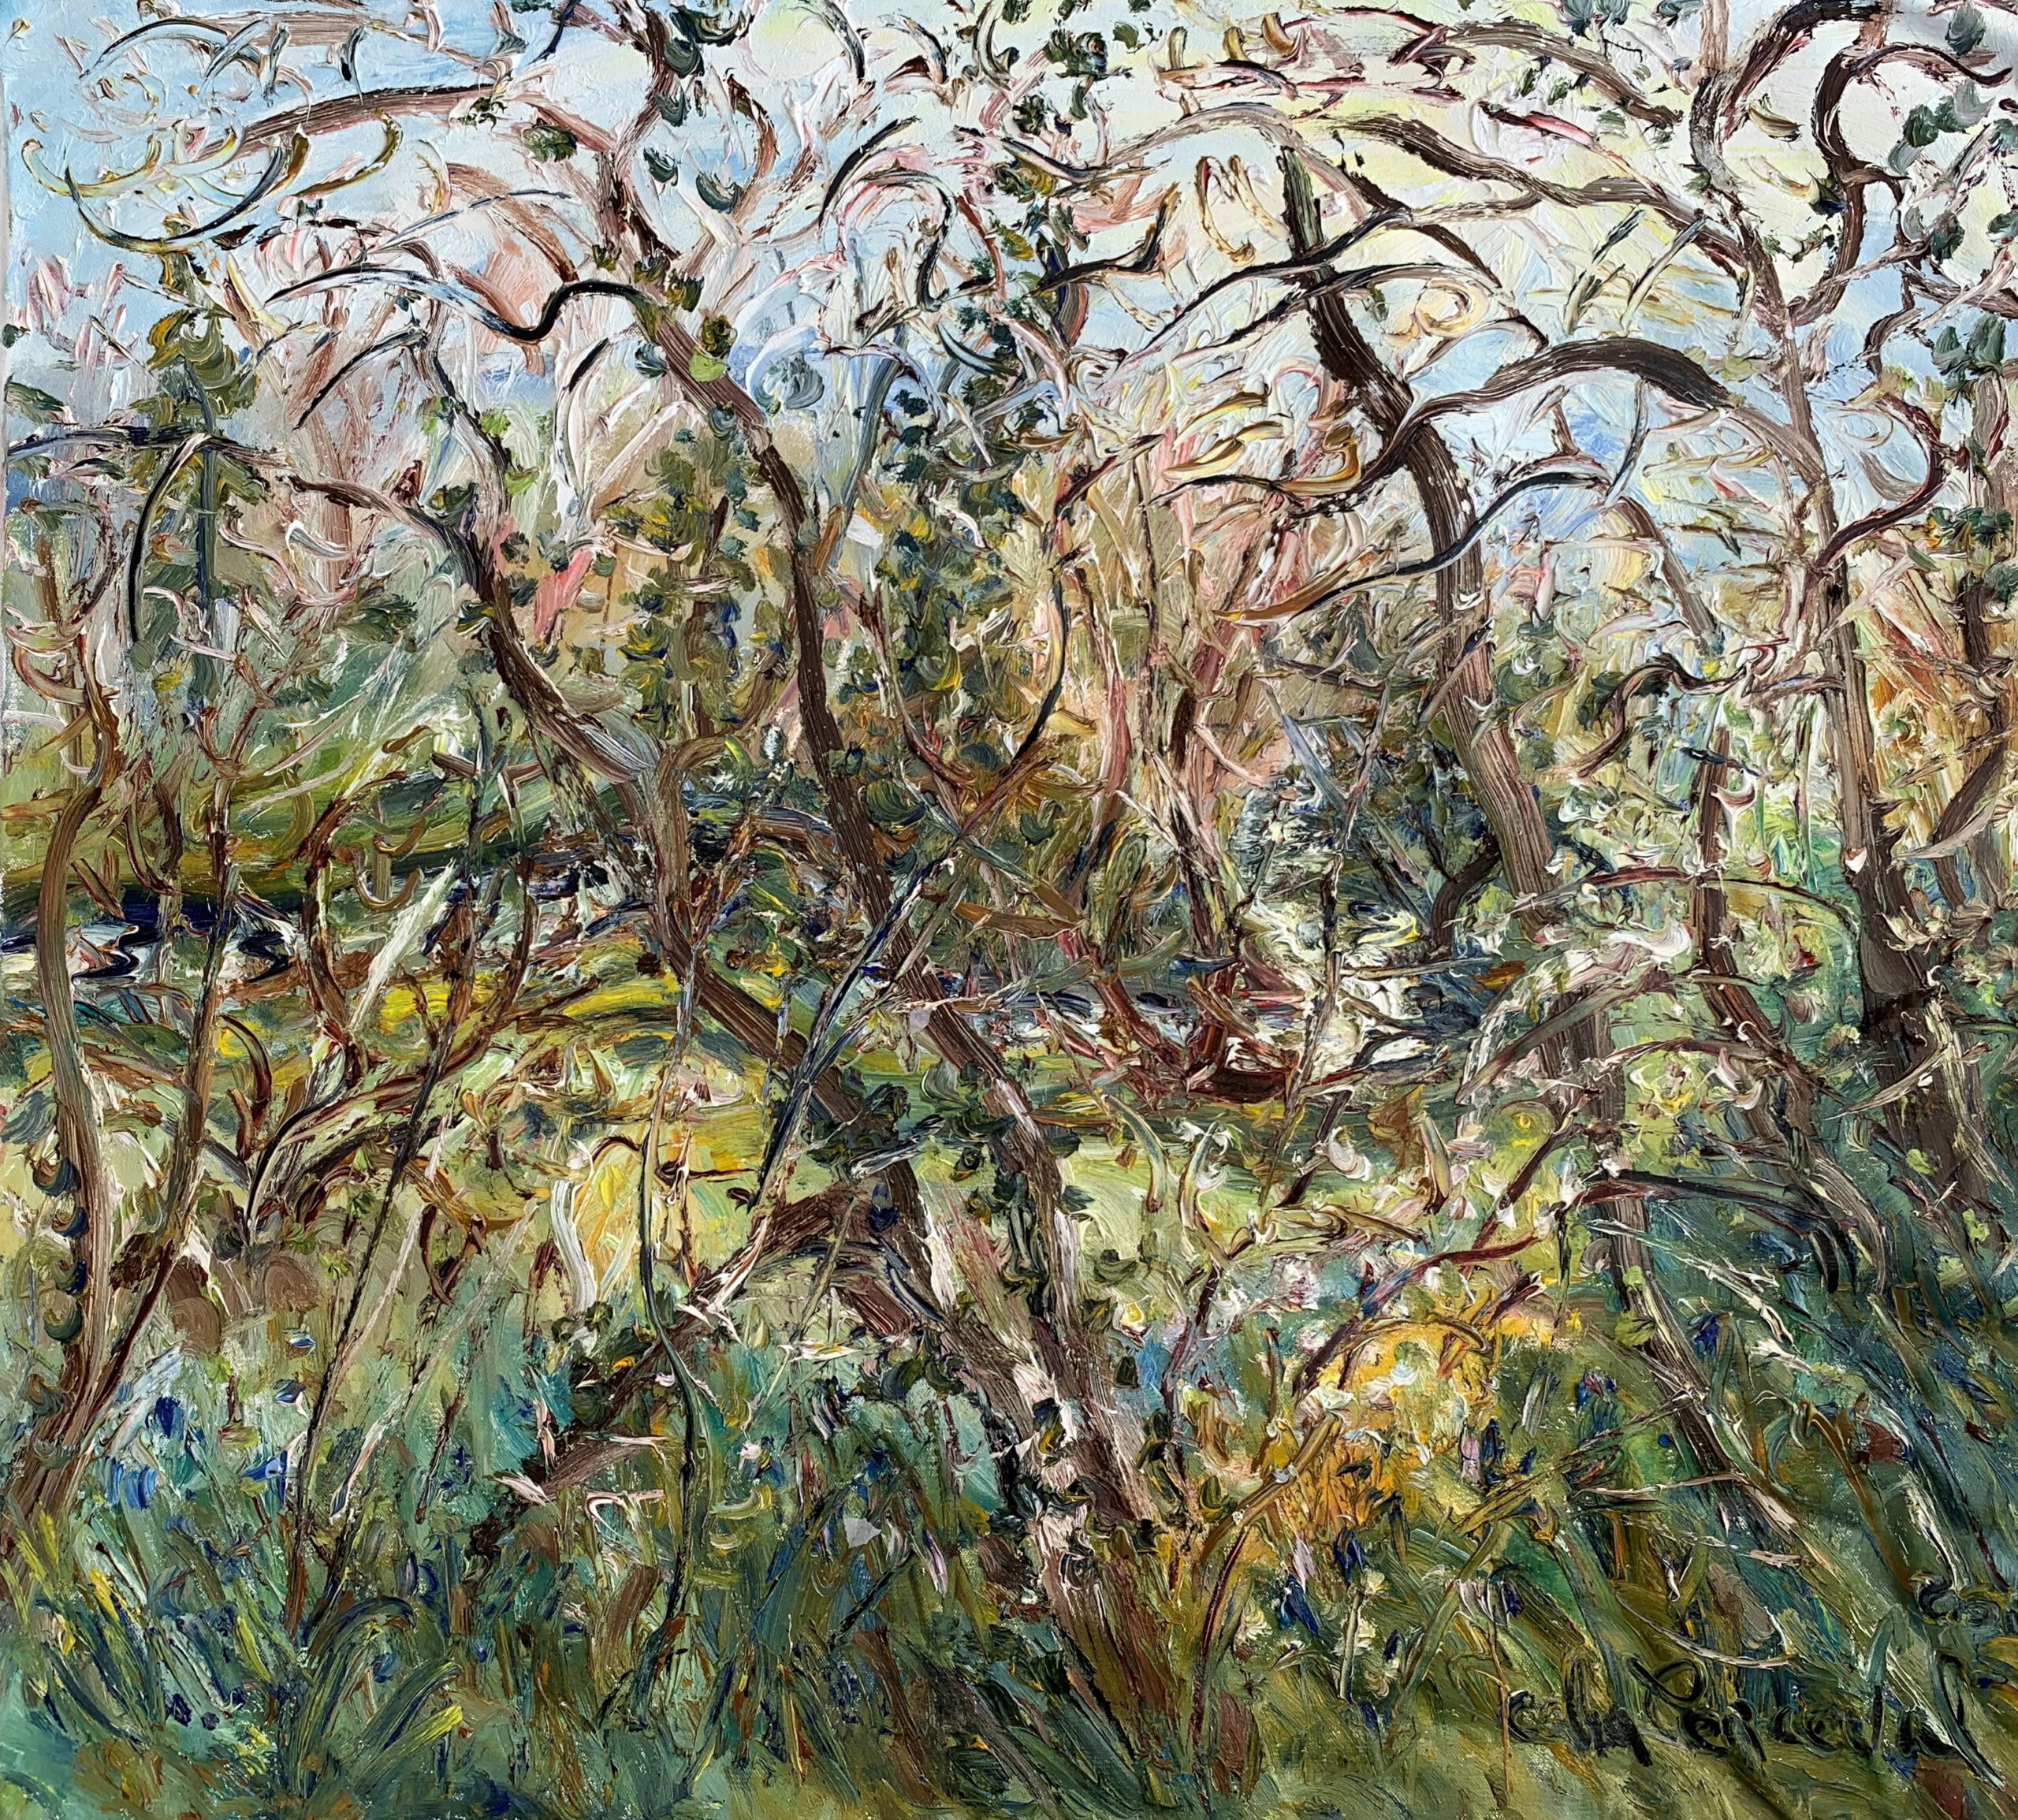 Perceval-The Hindwell Brook Winding Through the Woods with Bluebells and Blossom-oil on canvas-76 x 83cm-master